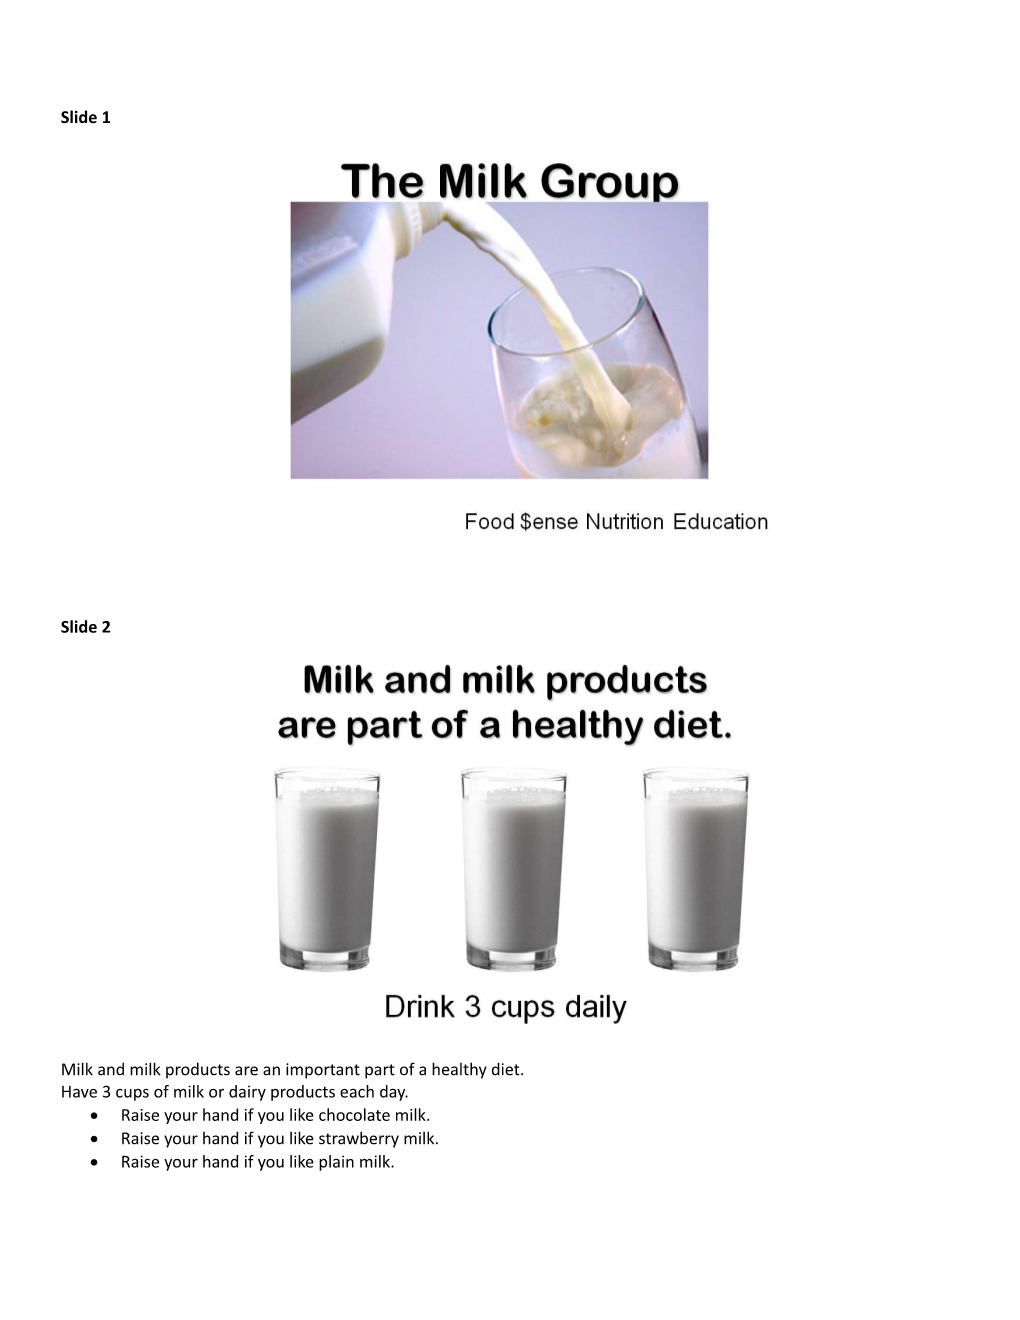 Milk and Milk Products Are an Important Part of a Healthy Diet